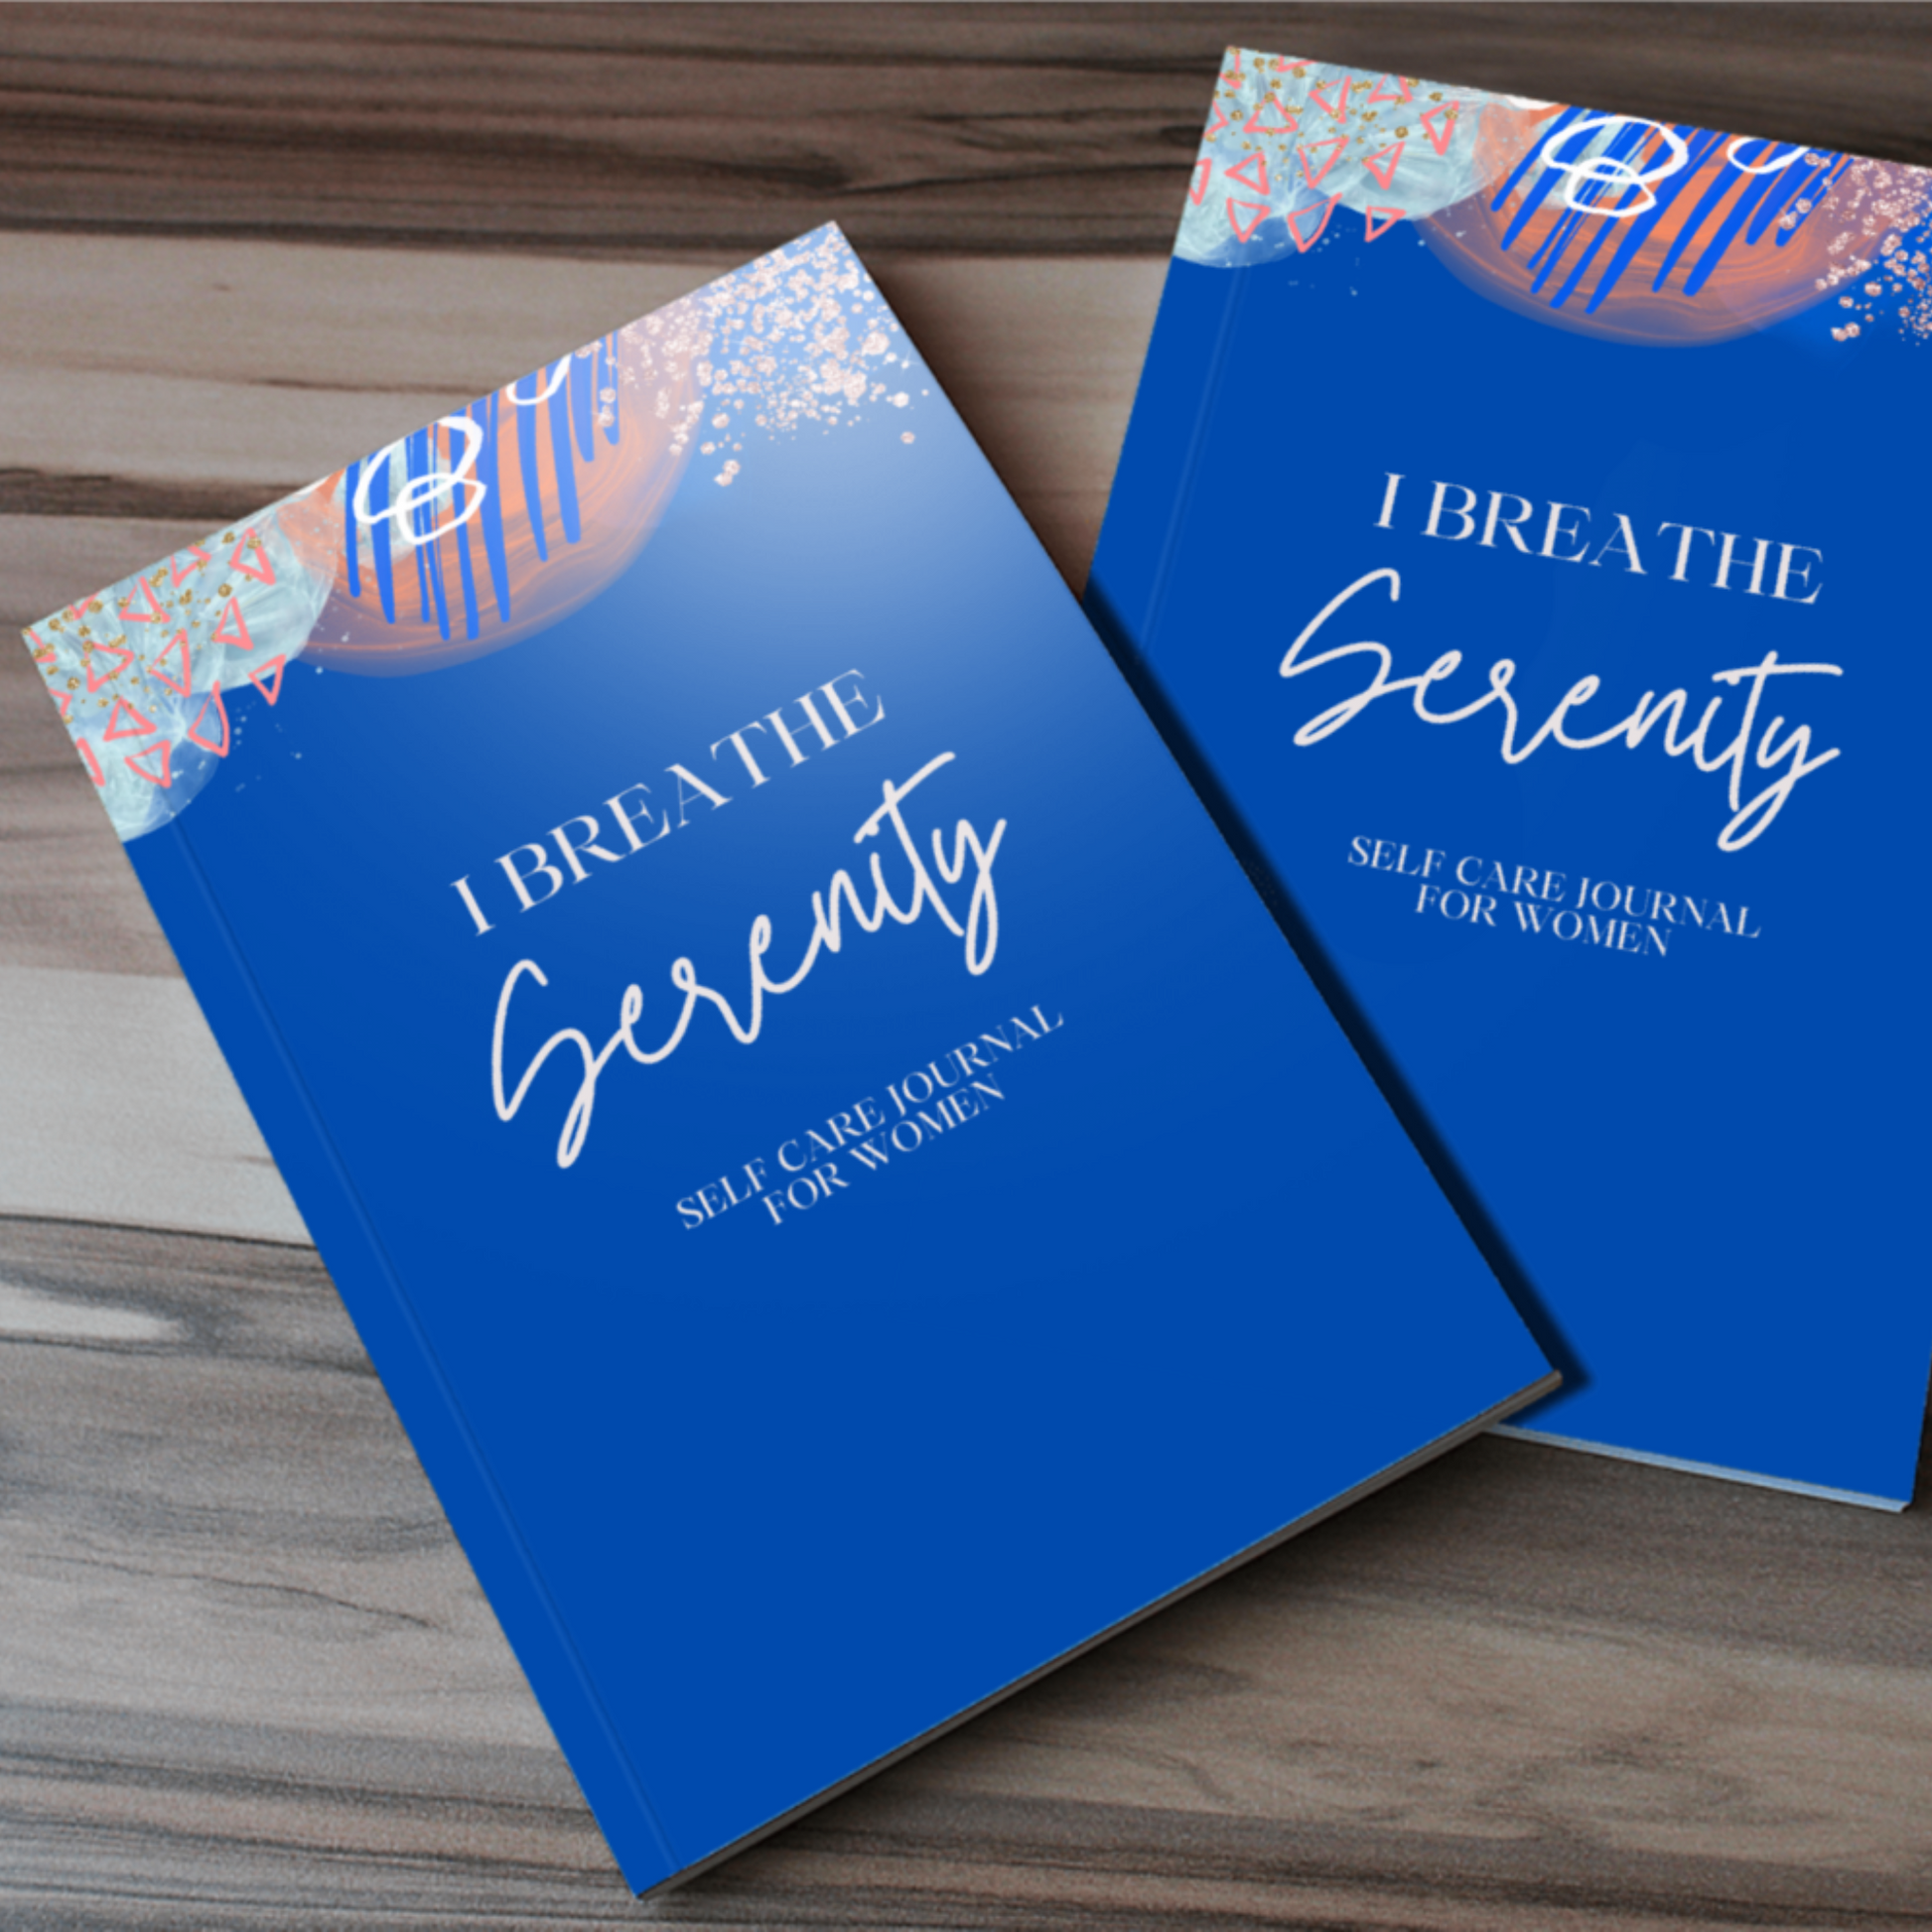 I Breathe Serenity Self Care Journal for KDP/Amazon & The Book Patch